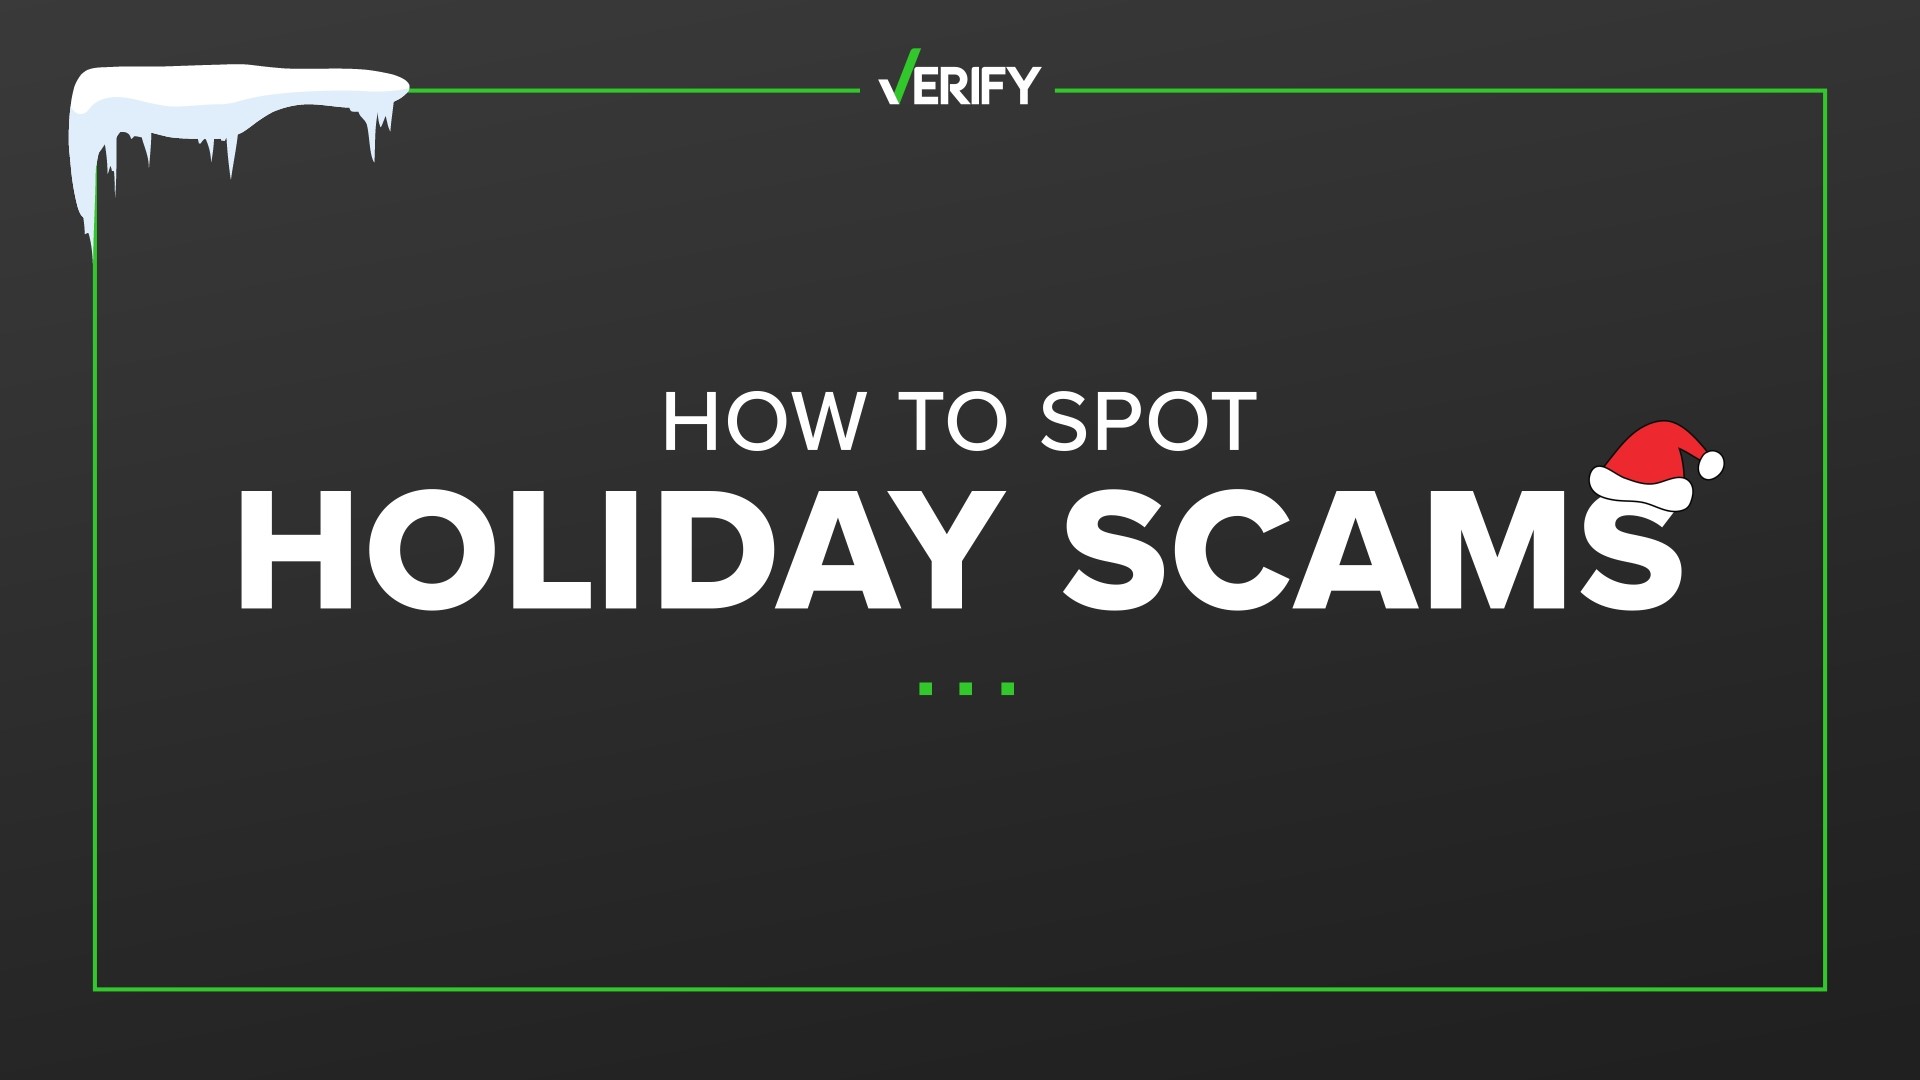 Scammers try to take advantage of the holiday season, when many people are shopping and donating more than they usually do. Here’s what to be wary of.